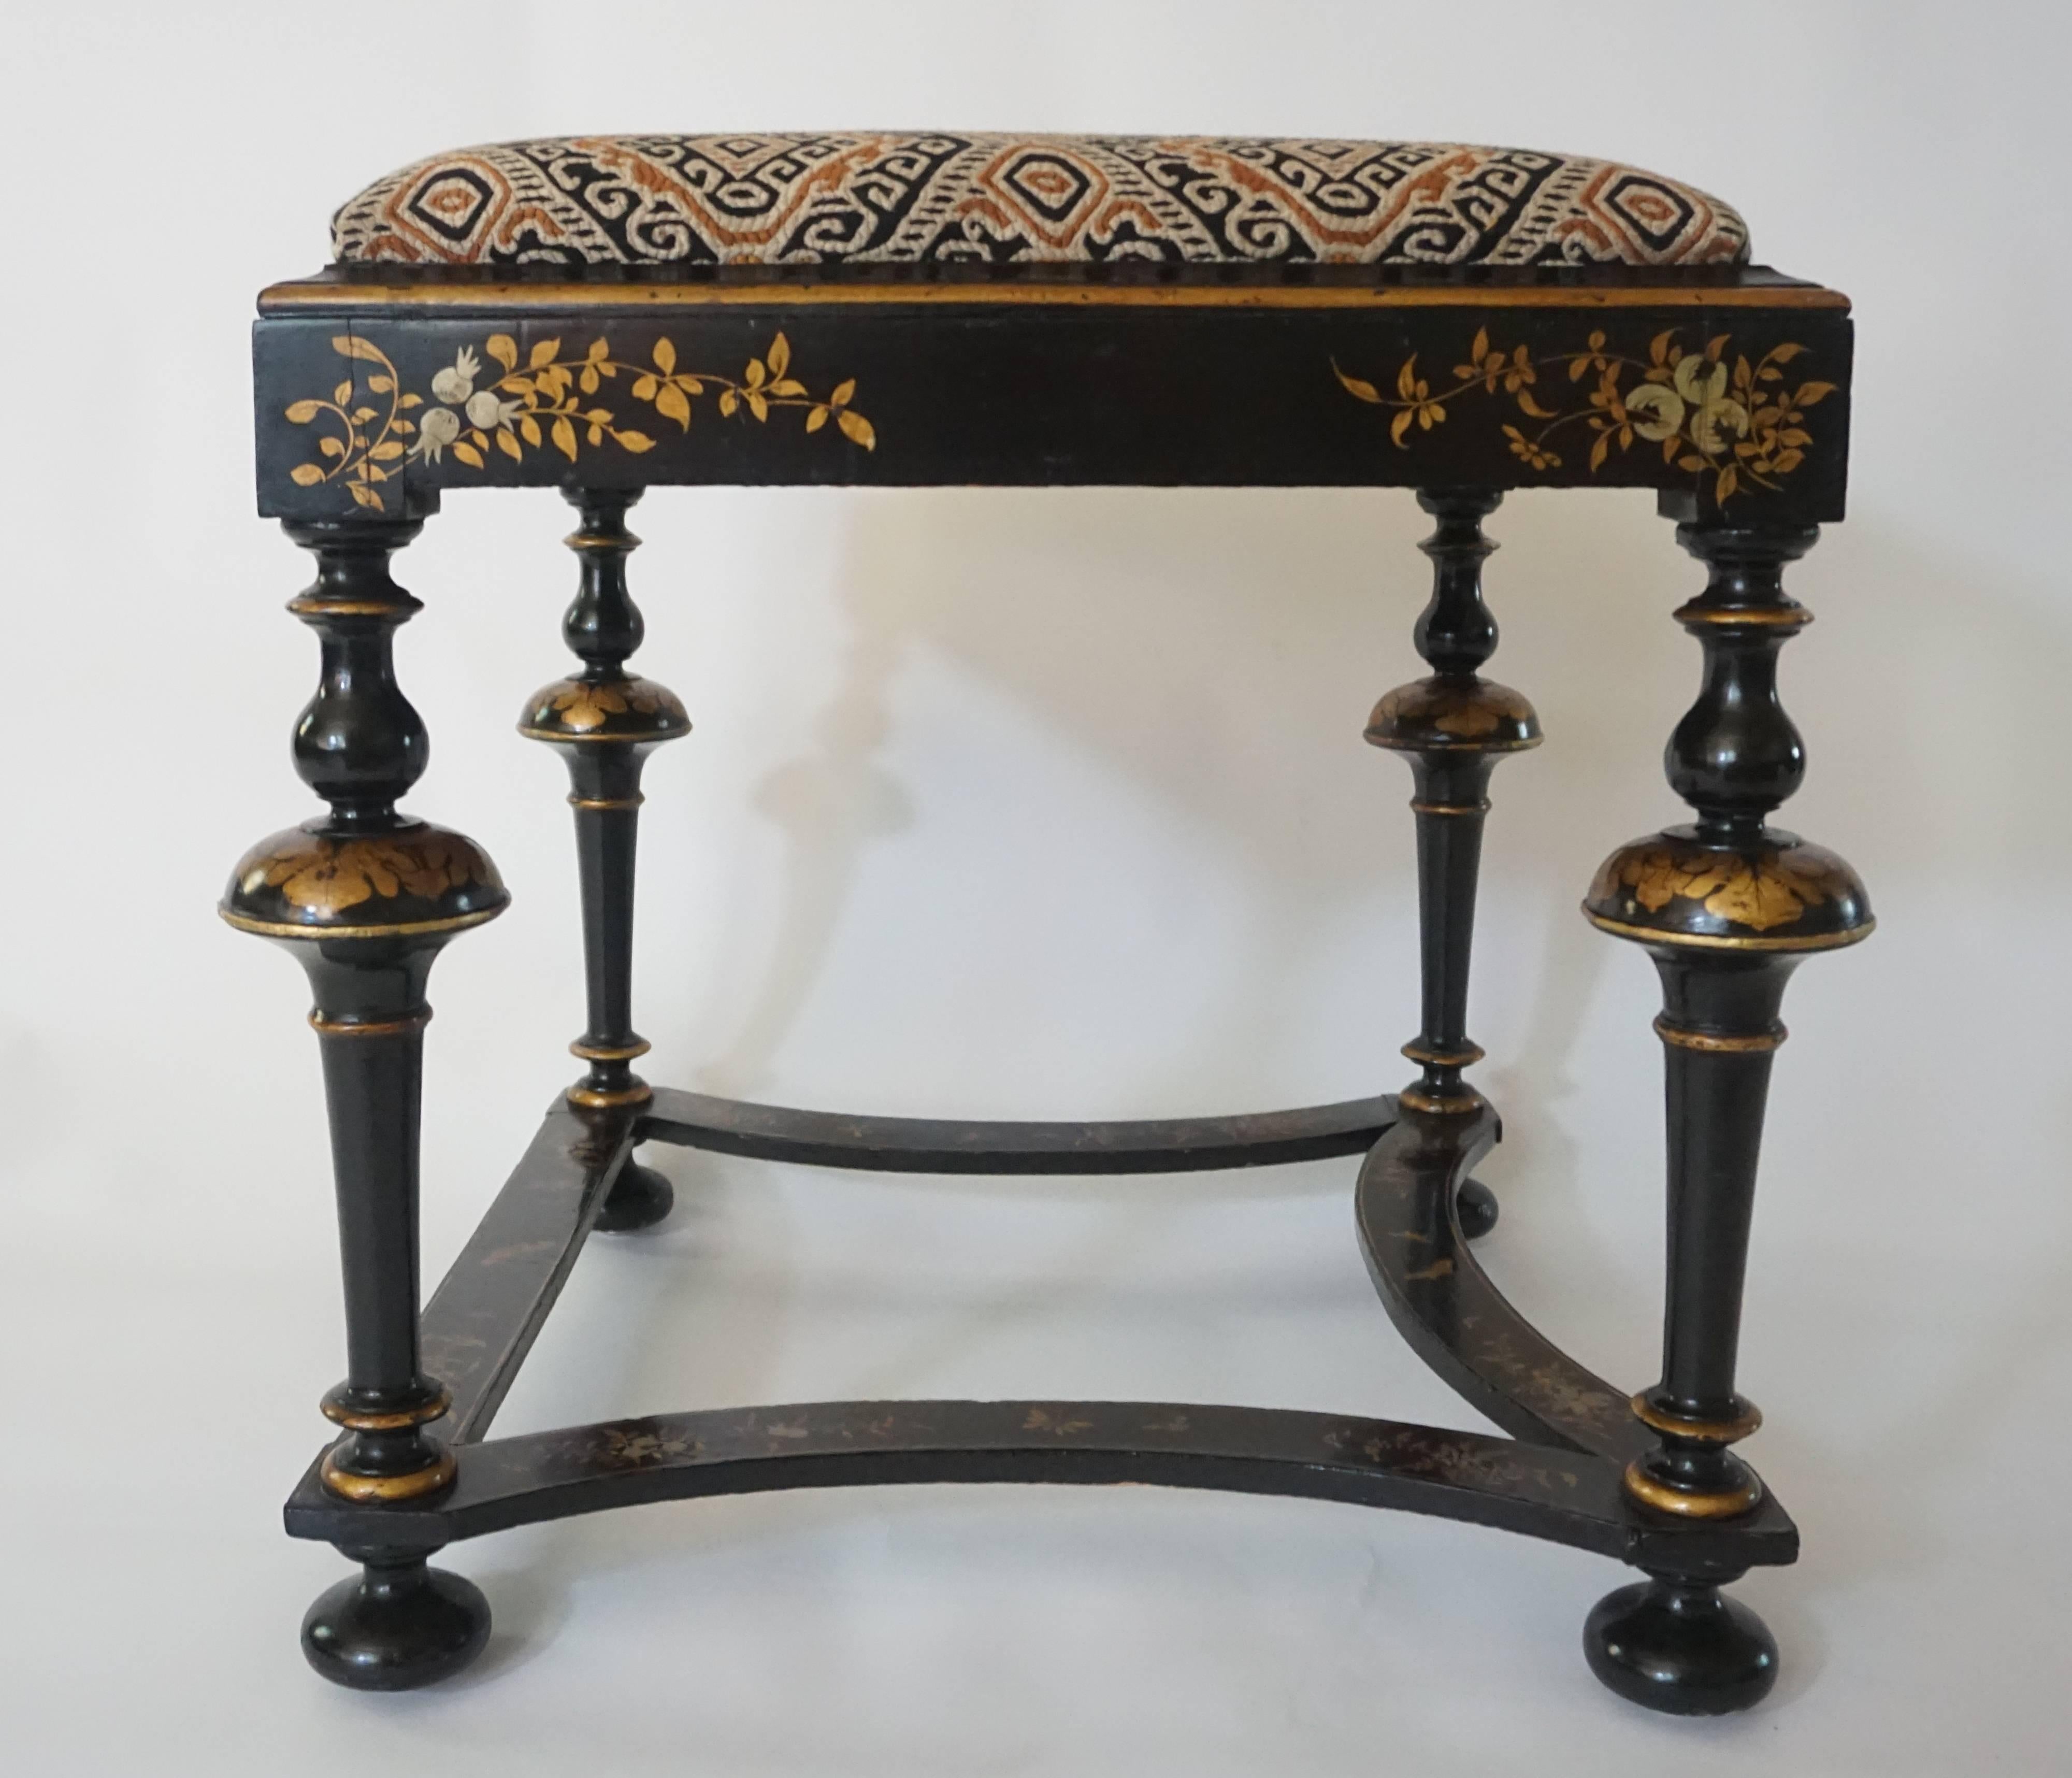 English Chinoiserie Lacquer William and Mary Style Stool or Tabouret